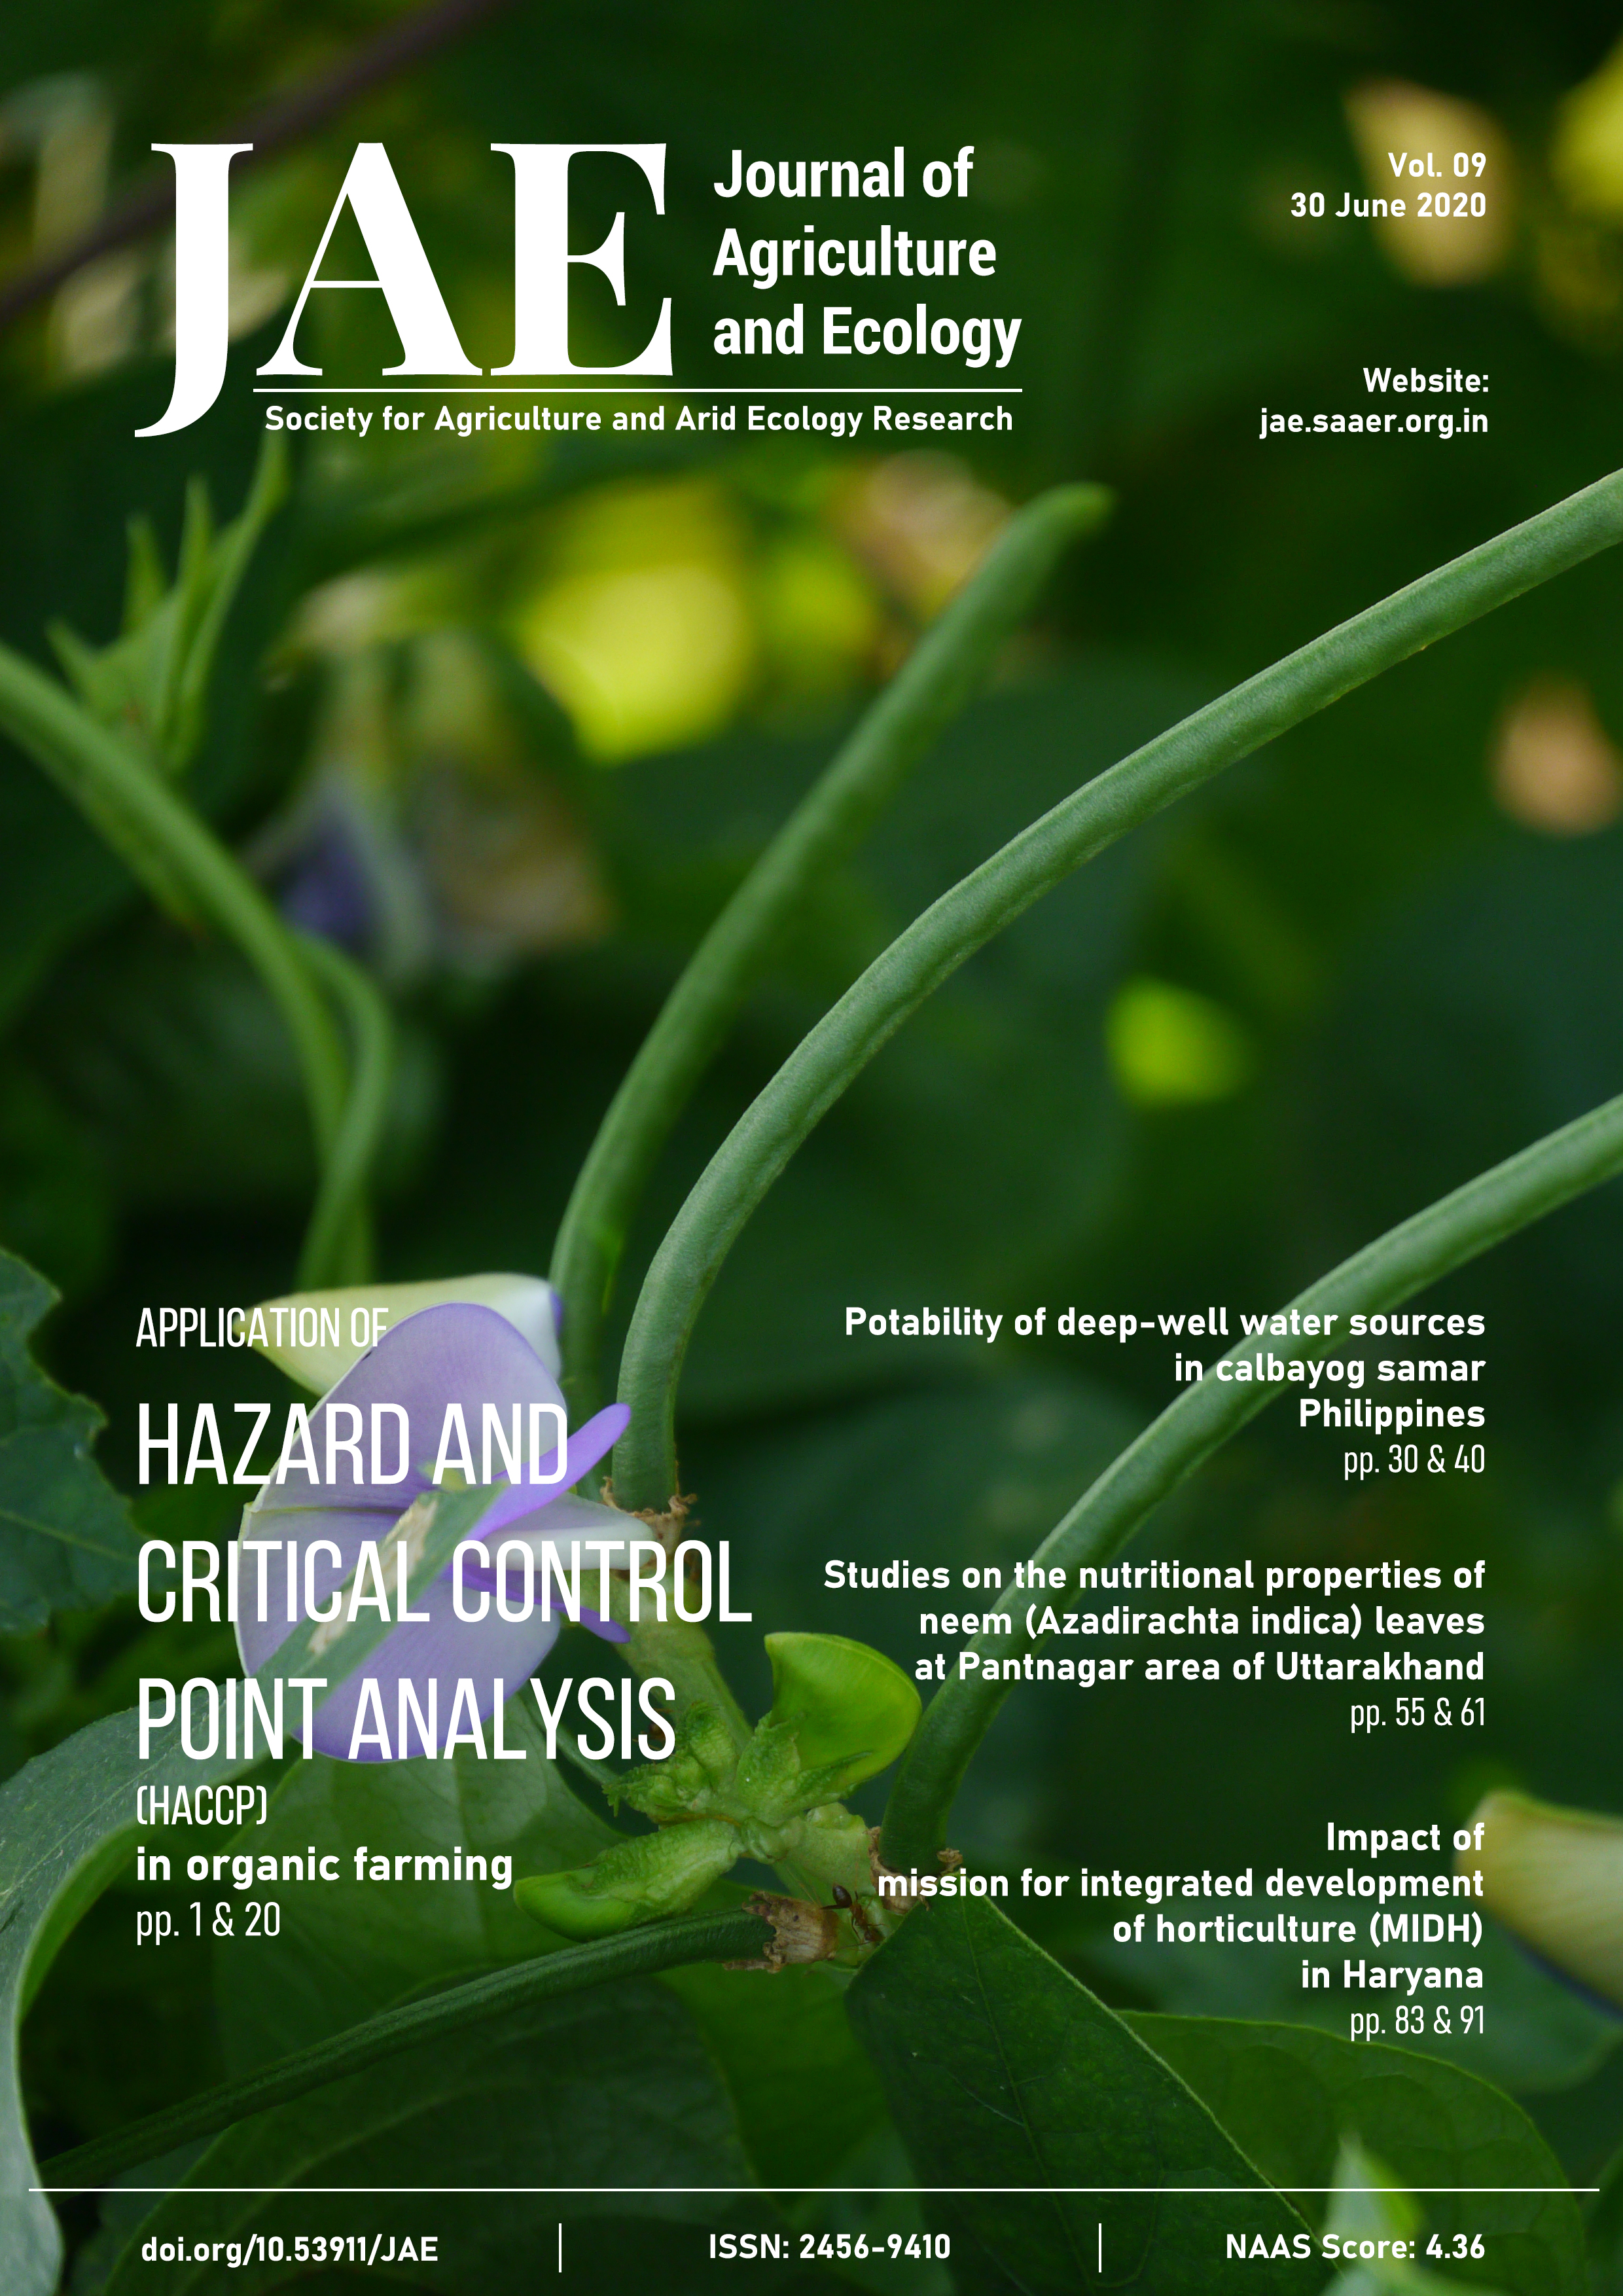 Journal of Agriculture and Ecology Issue 09 Cover